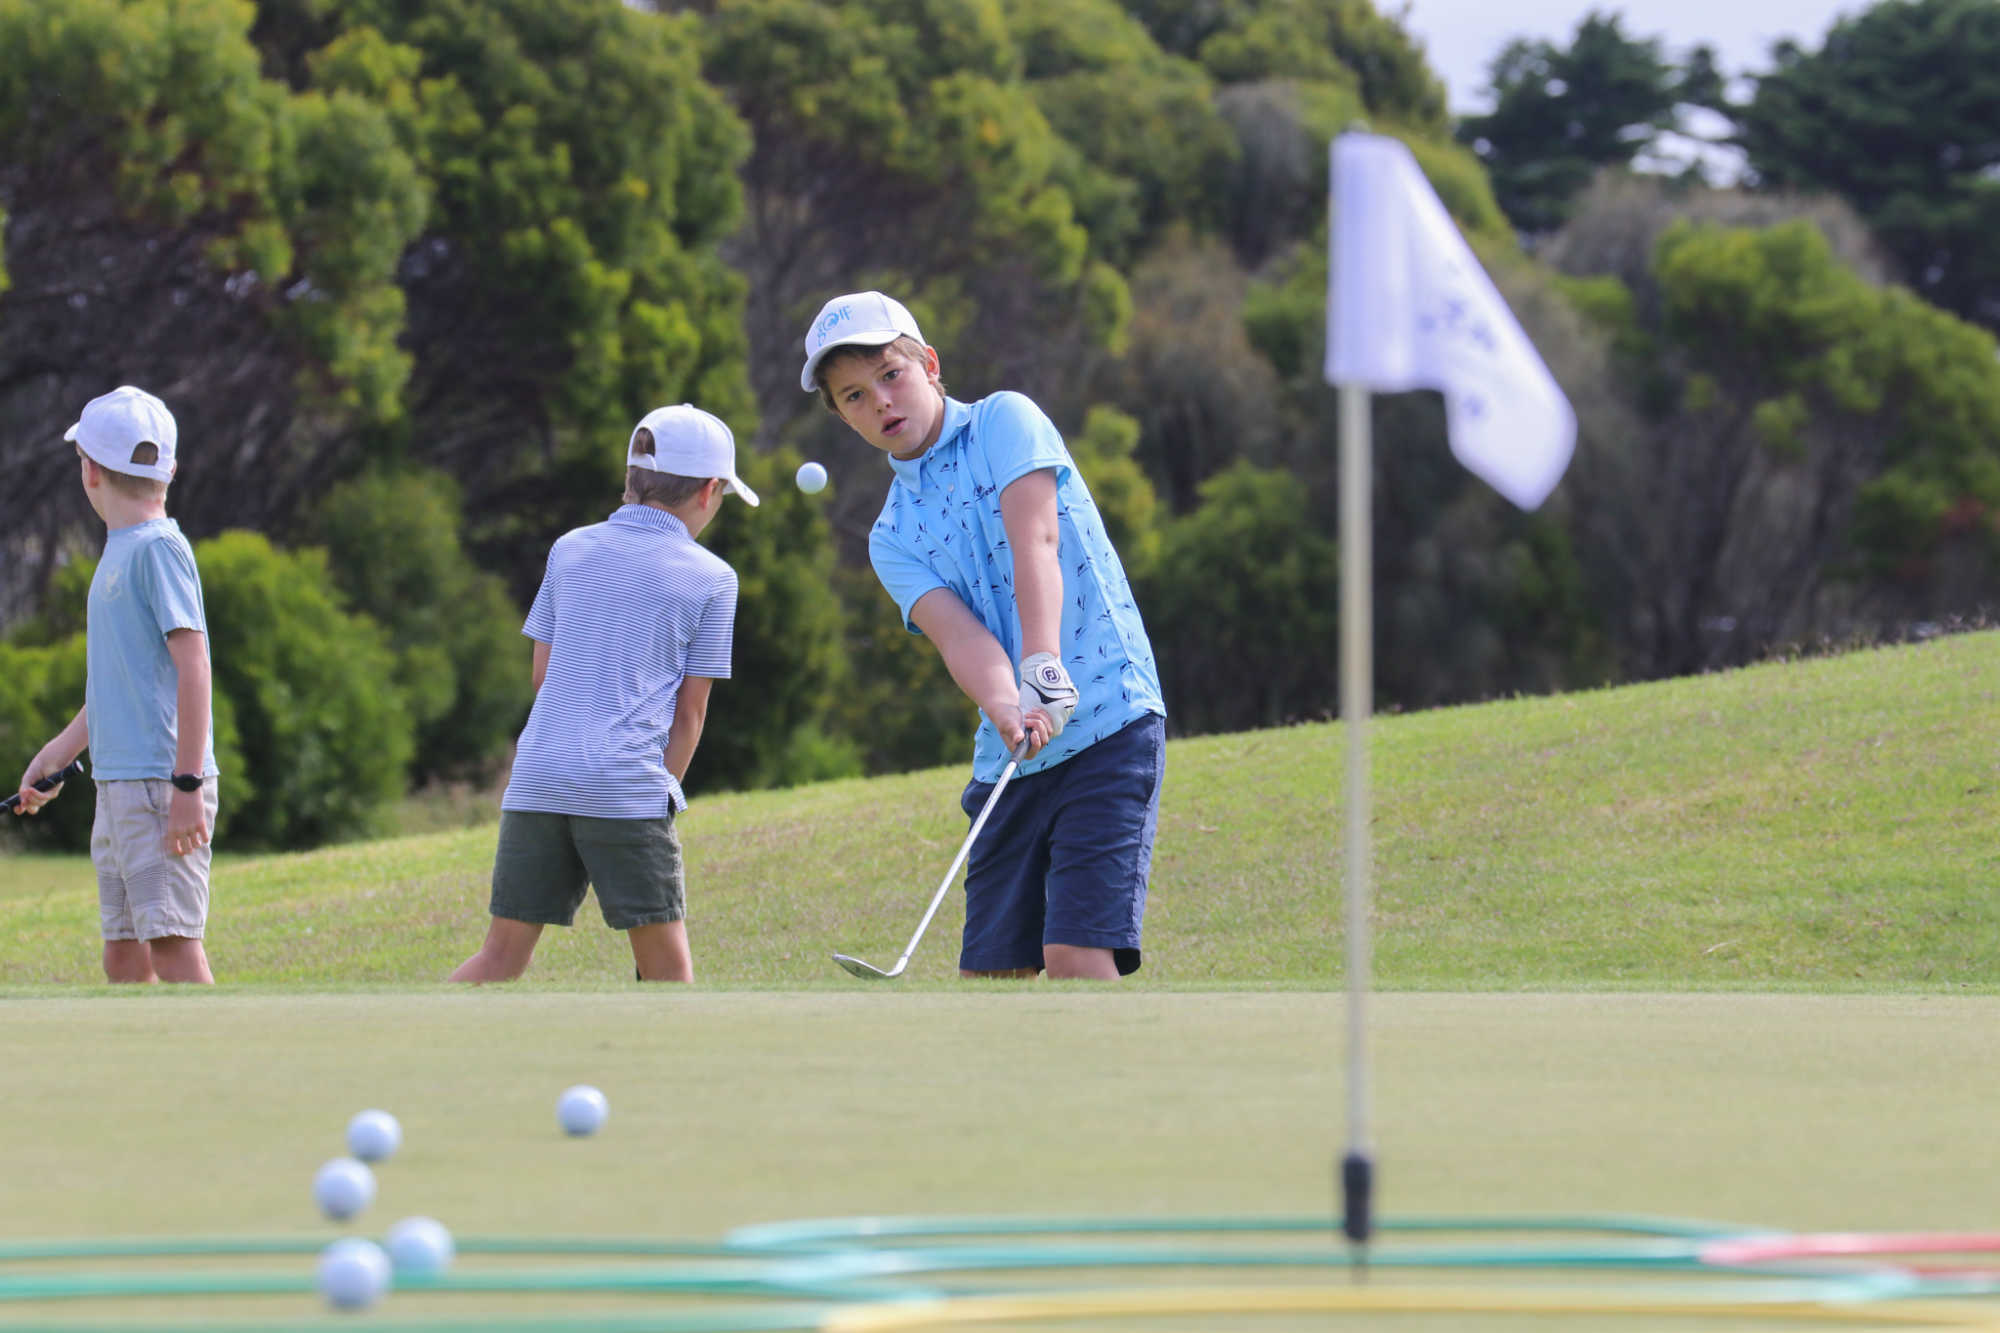 MyGolf clinic at the 2023 Vic Open